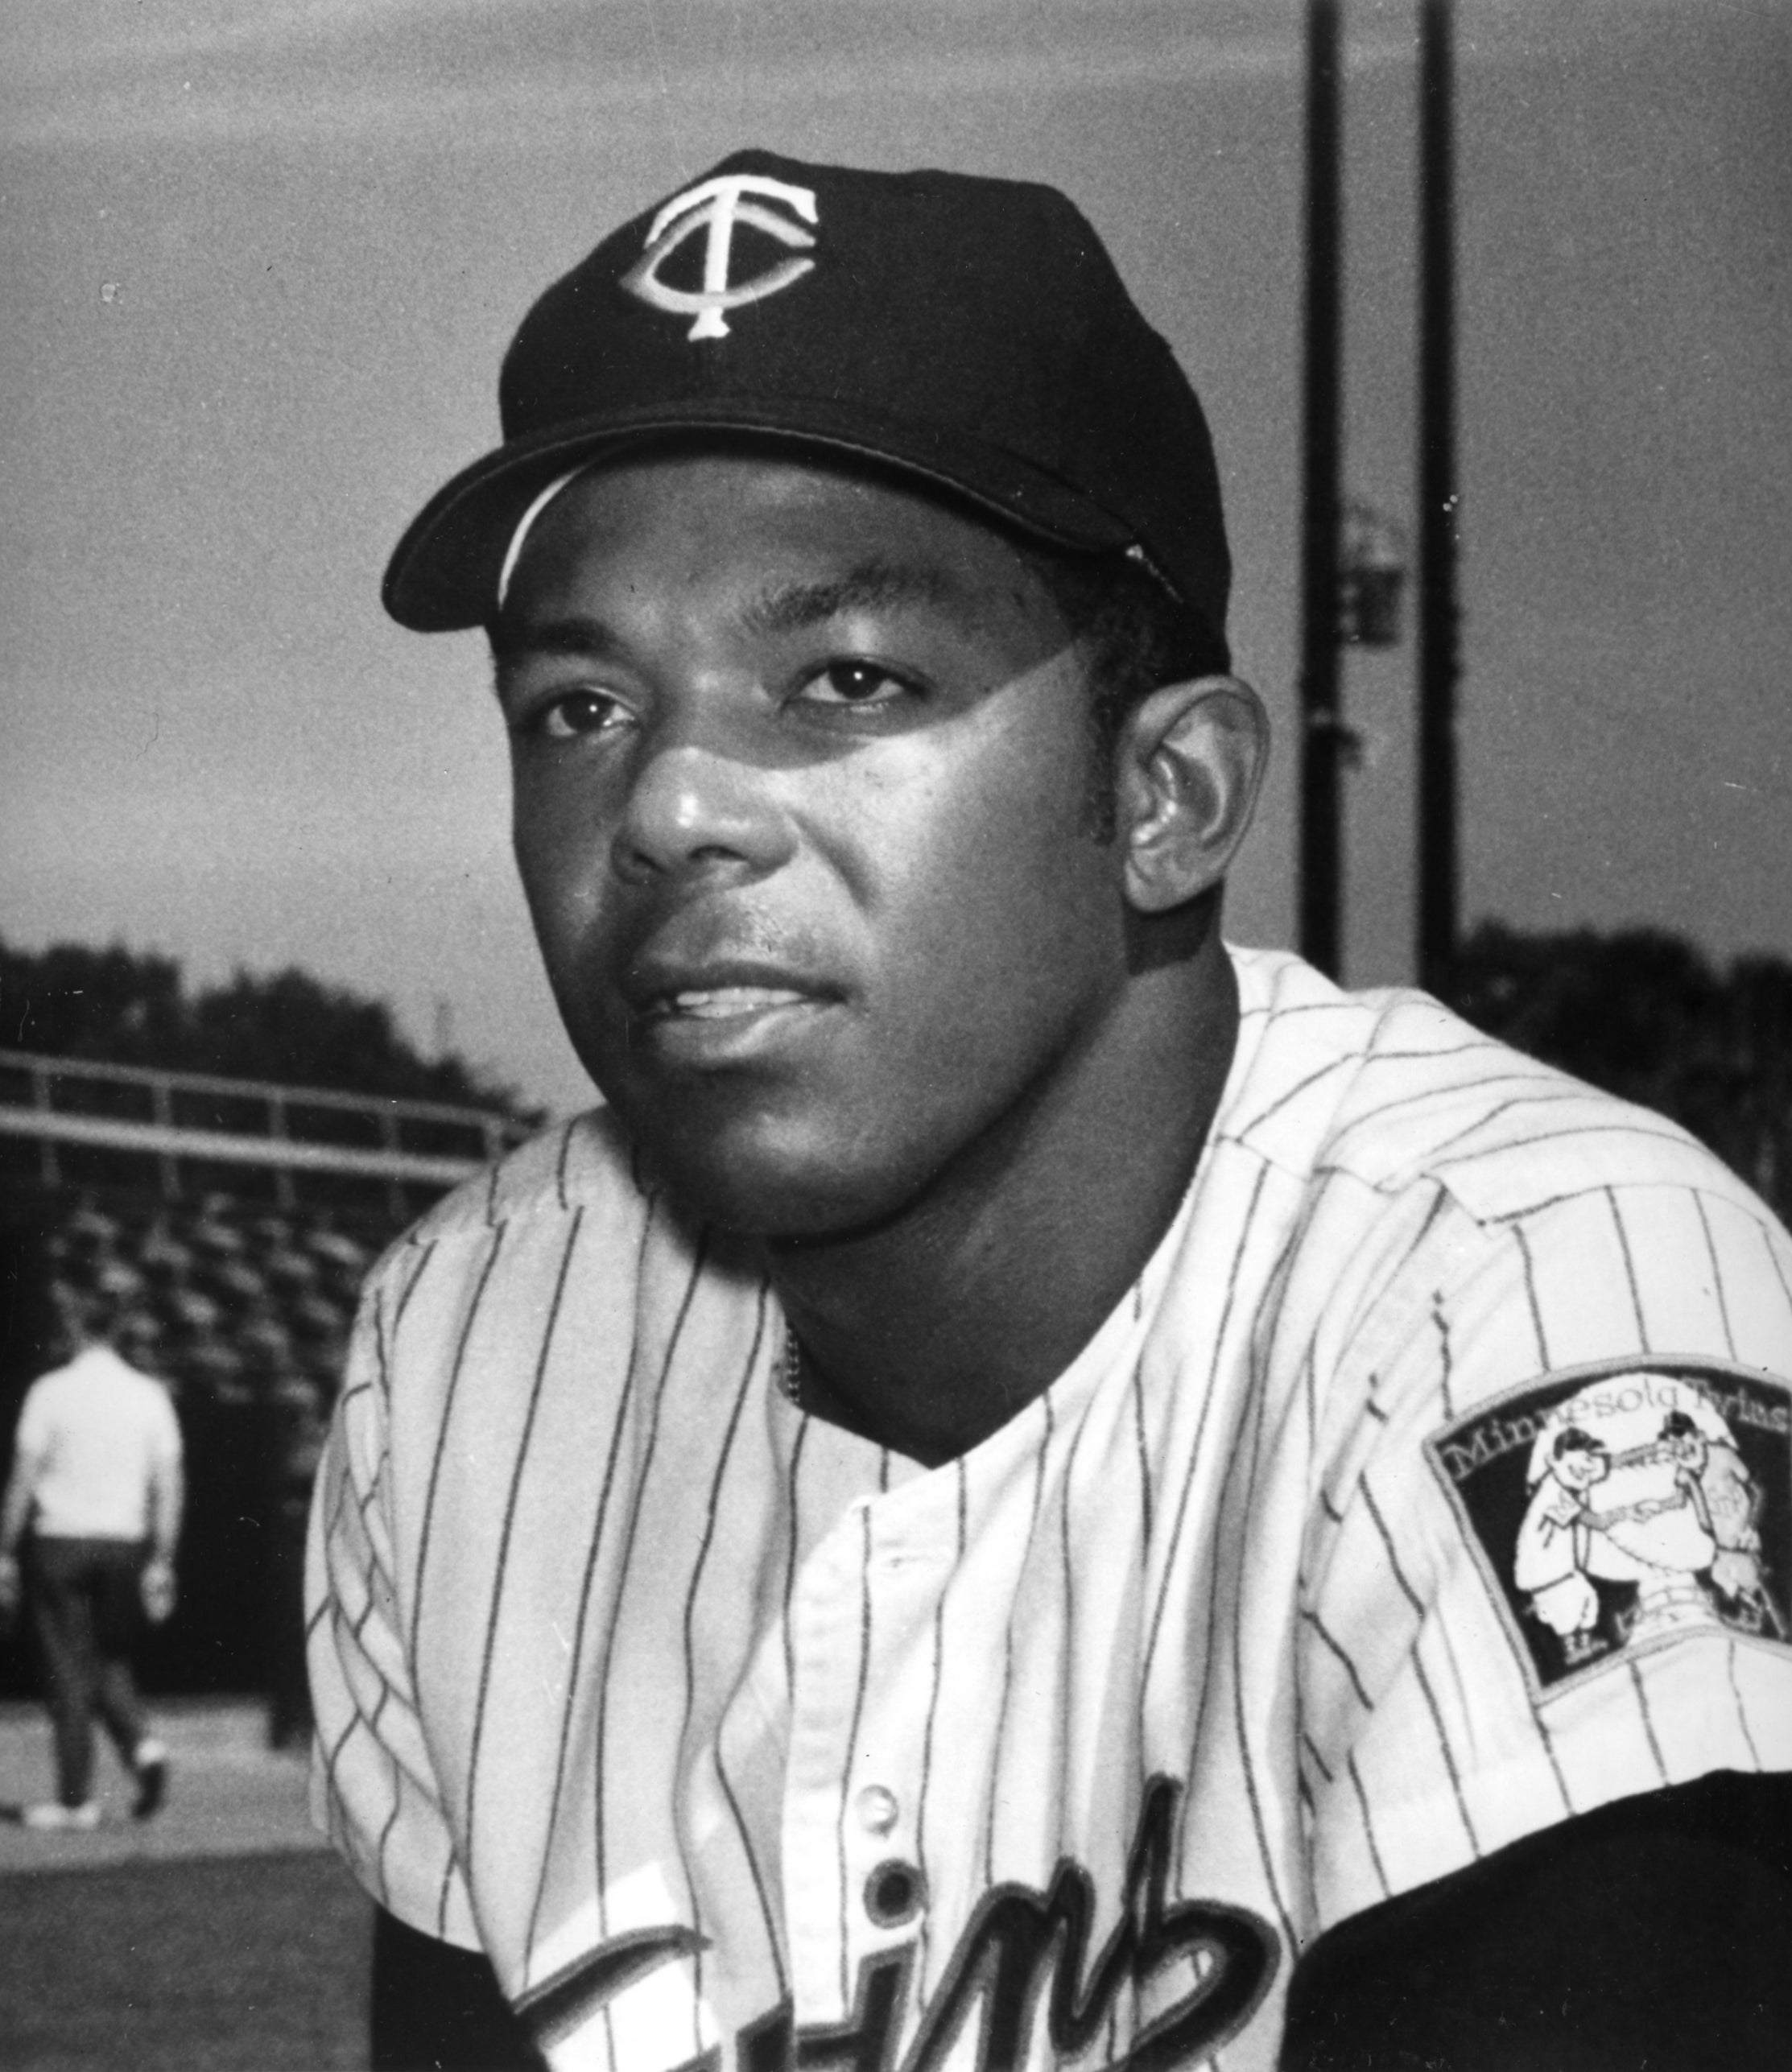 Tony Oliva dominated American League pitchers for almost a decade